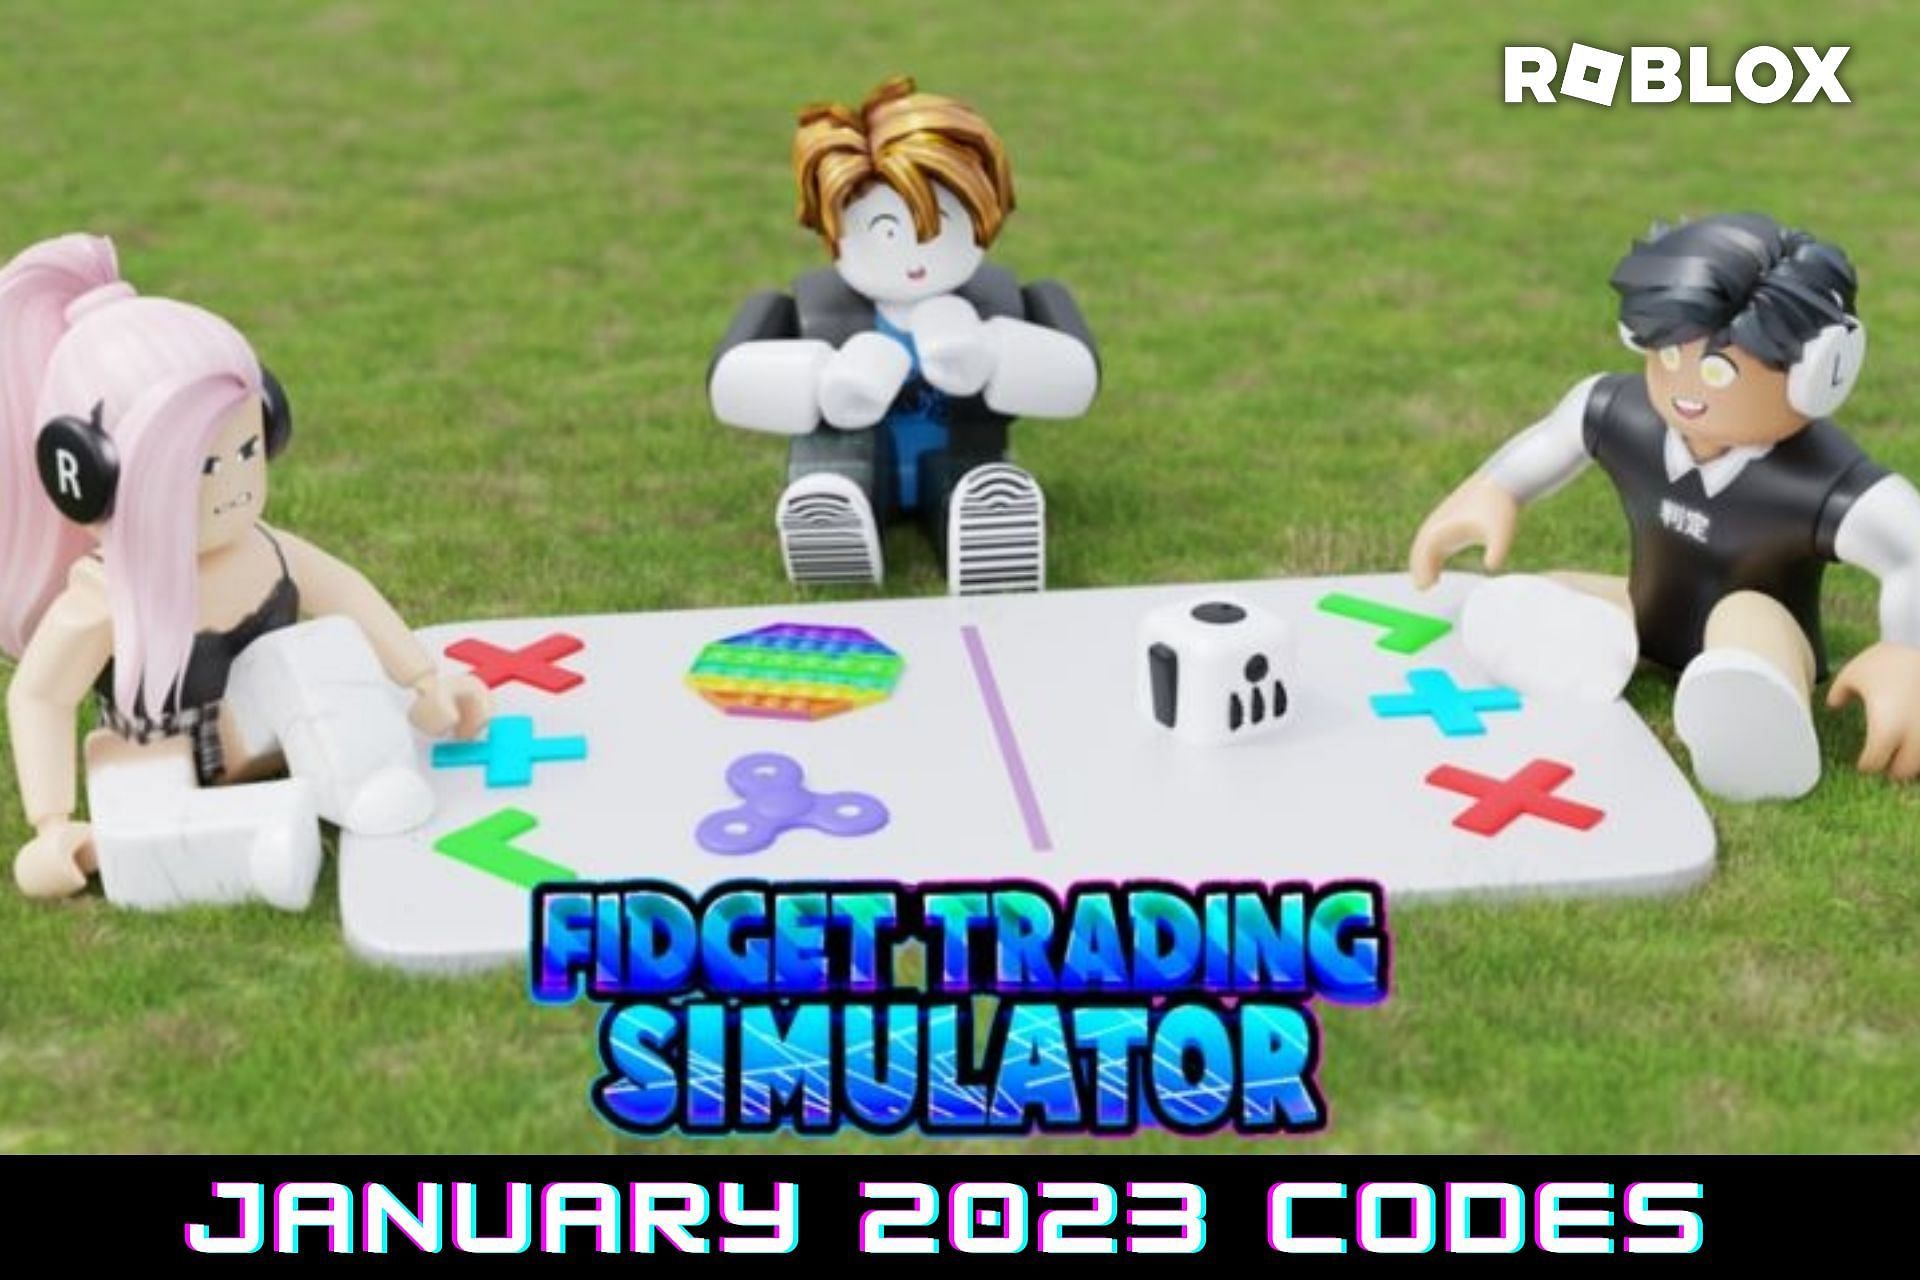 Roblox Pop It Trading codes for January 2023: Free items